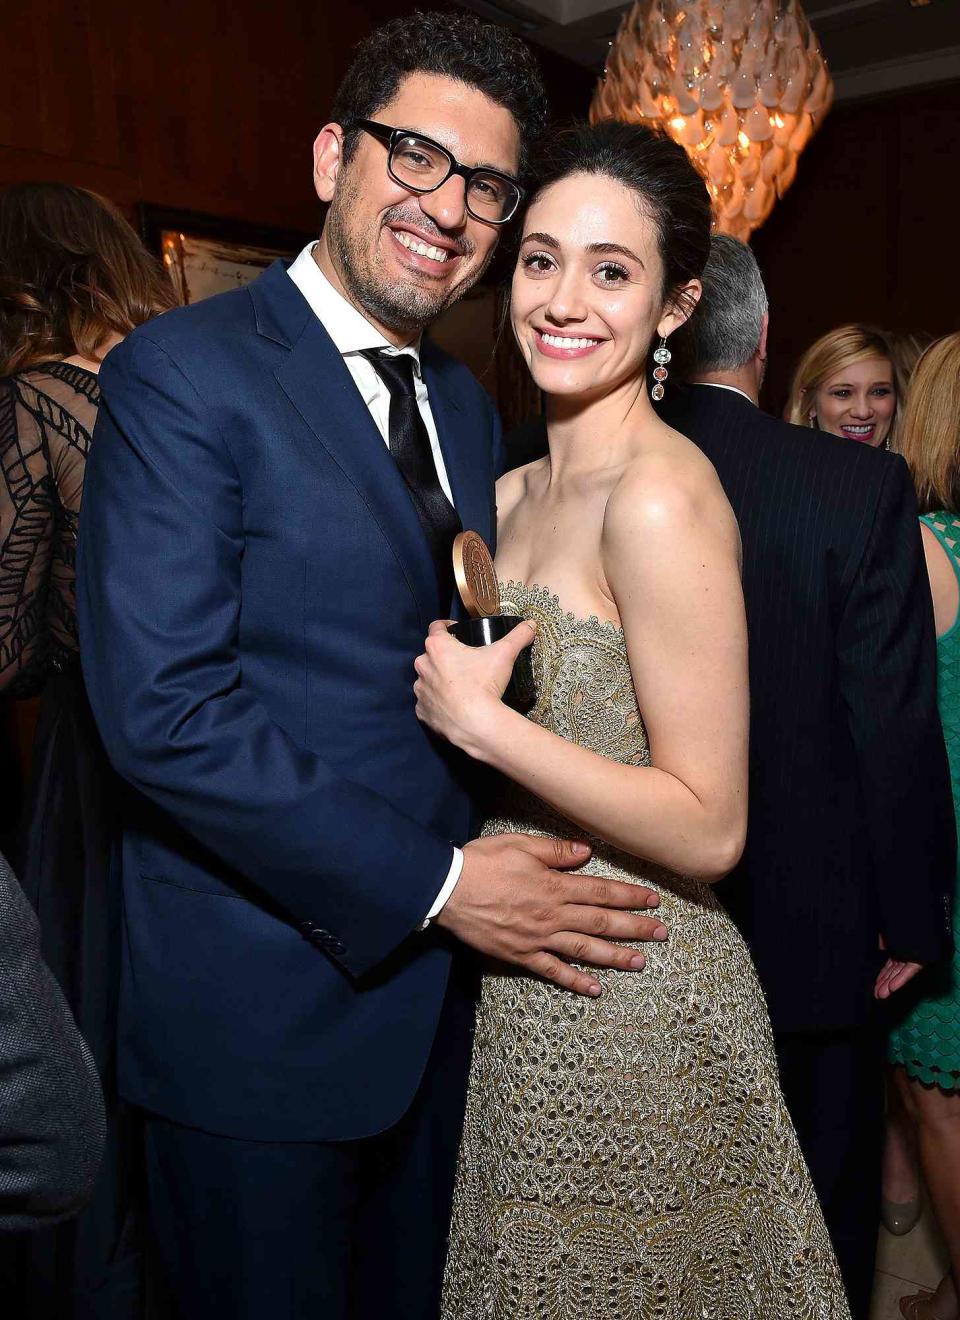 <p>The <i>Shameless</i> alumna and <i>Mr. Robot </i>creator Sam Esmail shared a fondness for <i>The</i> <i>New York Times</i>' "Modern Love" section, so it only makes sense that the romantic column would play a part in their own story.</p> <p>Speaking to <a href="https://www.vogue.com/article/emmy-rossum-wedding-2017-carolina-herrera?mbid=social_twitter" rel="nofollow noopener" target="_blank" data-ylk="slk:Vogue;elm:context_link;itc:0;sec:content-canvas" class="link "><i>Vogue</i></a> after her <a href="https://people.com/style/emmy-rossum-marries-sam-esmail-wedding/" rel="nofollow noopener" target="_blank" data-ylk="slk:2017 wedding;elm:context_link;itc:0;sec:content-canvas" class="link ">2017 wedding</a>, Rossum opened up about the way <a href="https://people.com/tv/emmy-rossum-engaged-to-sam-esmail/" rel="nofollow noopener" target="_blank" data-ylk="slk:they got engaged;elm:context_link;itc:0;sec:content-canvas" class="link ">they got engaged</a> two years earlier. </p> <p>"I do a dramatic reading of it for him. Even if we're not in the same place, I read it to him over the phone," the actress explained of their "Modern Love" tradition. "Then one weekend we didn't read it—I don't remember why exactly—and the following Friday he reminded me that we hadn't. I was actually in kind of a bad mood that day, so I said, 'Oh, well I'll read it eventually.' And he said, 'No, no, no, I think you should read it.' And I said, 'I'm having a back spasm. I'm actually going to take a bath and have a glass of wine, but if you really want to hear it I'll read it to you from the bathtub."</p> <p>"I began to read the article, and the story is about a director who falls in love with an actress, and I started to think: Huh, that's strange. And then I realized that it was our love story. At first, I freaked out because I thought perhaps he had actually put it in the paper and I hadn't seen it, and everyone knew it but me."</p> <p>Rossum soon realized that her husband had gone to lengths to ask her to marry him. "Apparently he had called Daniel Jones at <i>The New York Times</i> and gotten their paper template and gotten the people there to print out a whole mock section on the bottom half. He had even put an ad for the Ralph Lauren Ricky Bag," she said. "By the time I finished the story he was down on a knee in the bathroom, with me in the tub."</p>